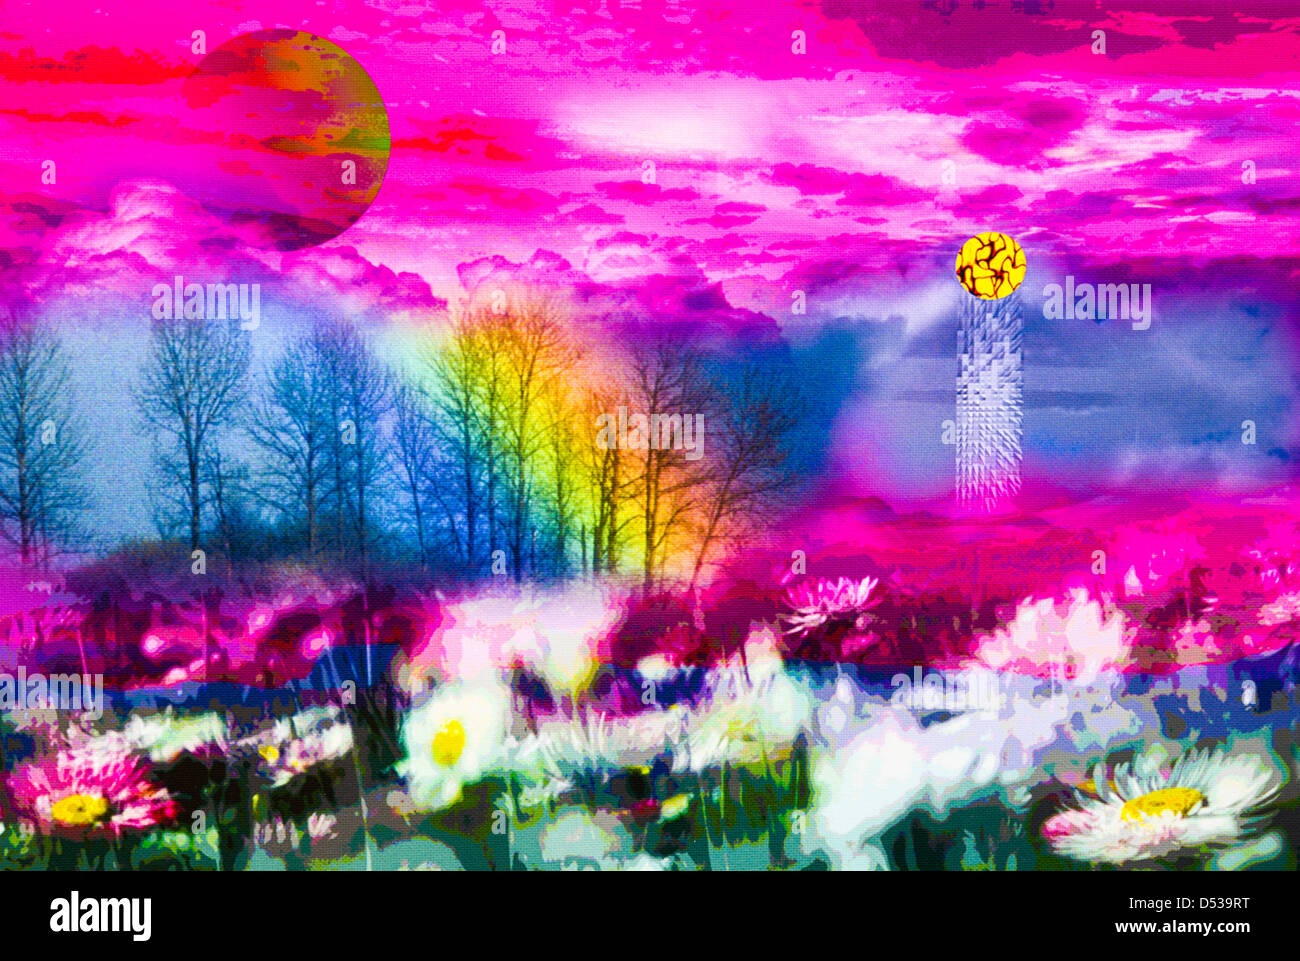 The Spirit of Spring Photoshop Digital Art by Anthony Green Stock Photo